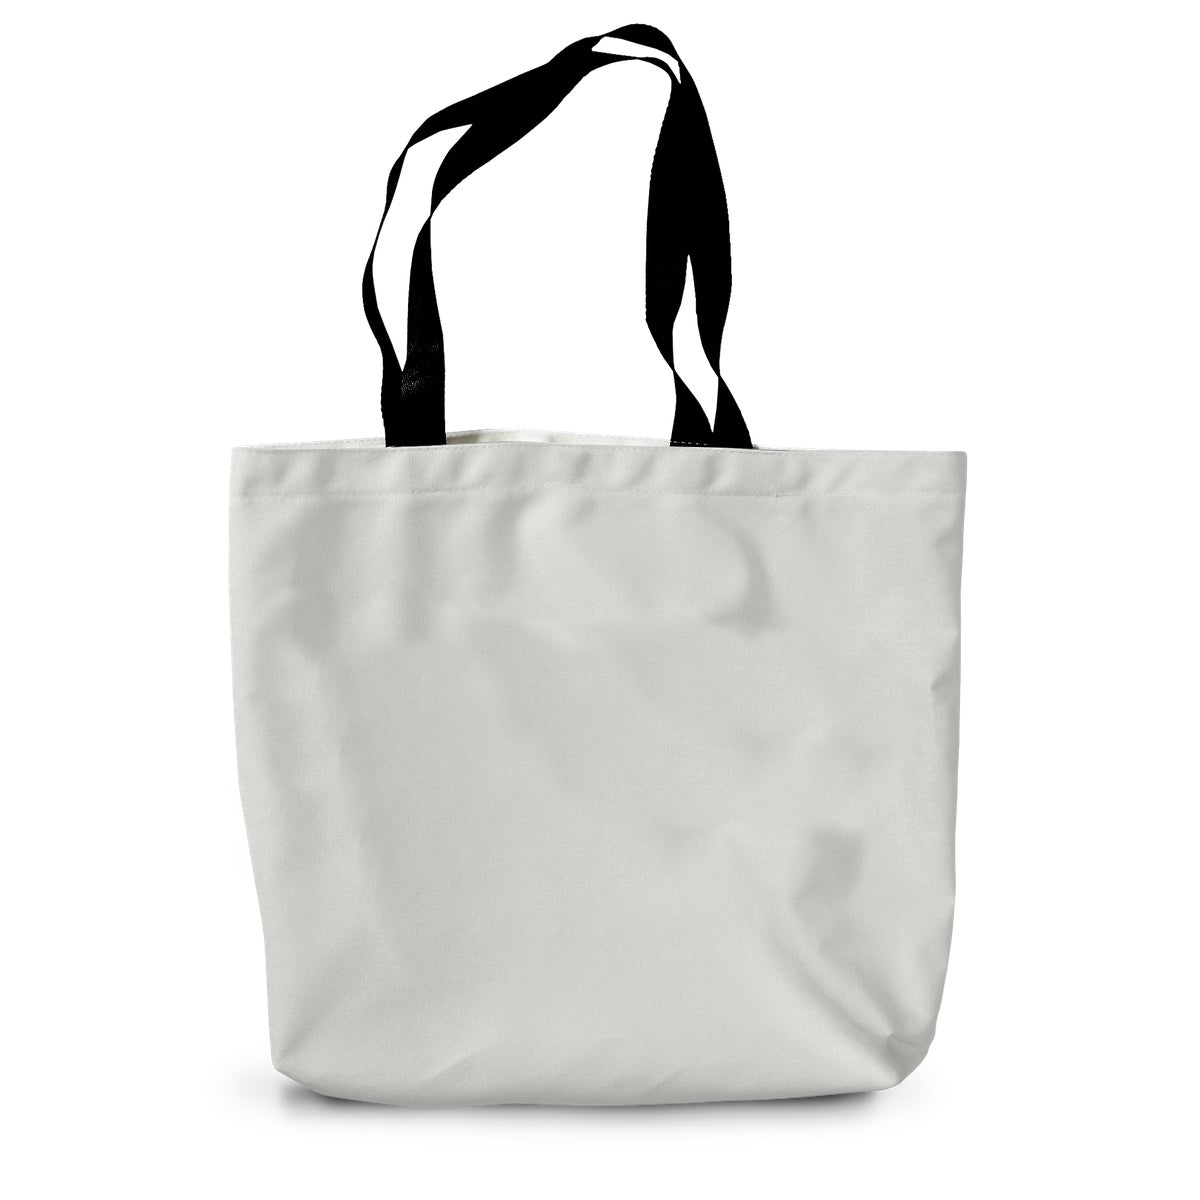 I Can See You! Canvas Tote Bag